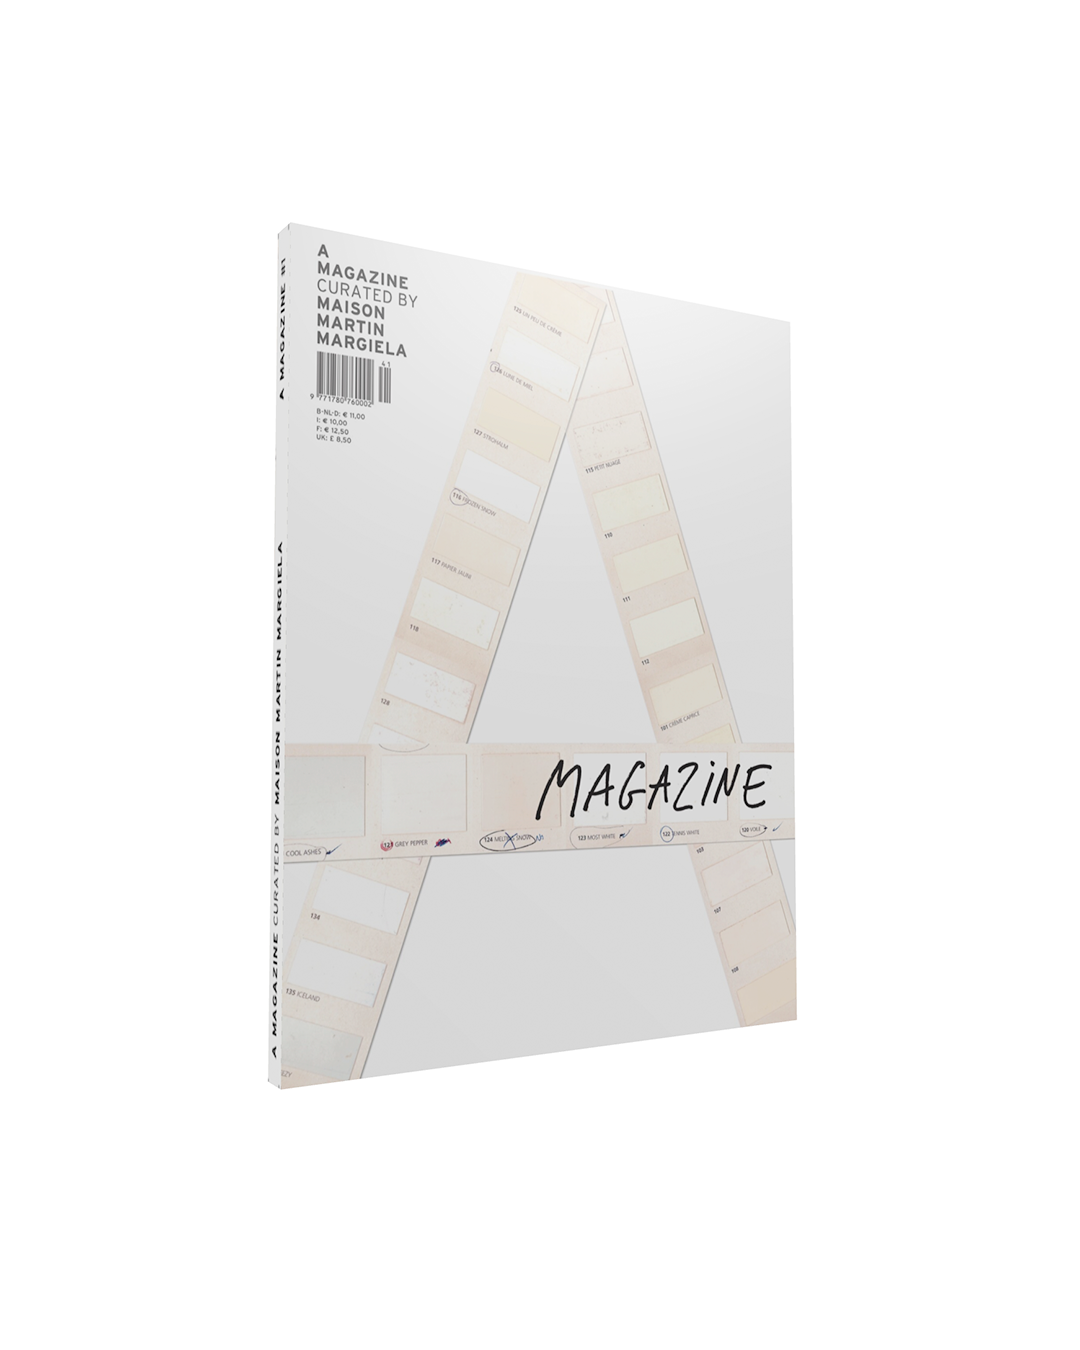 A Magazine Curated By Maison Margiela 2004 Limited Edition Reprint